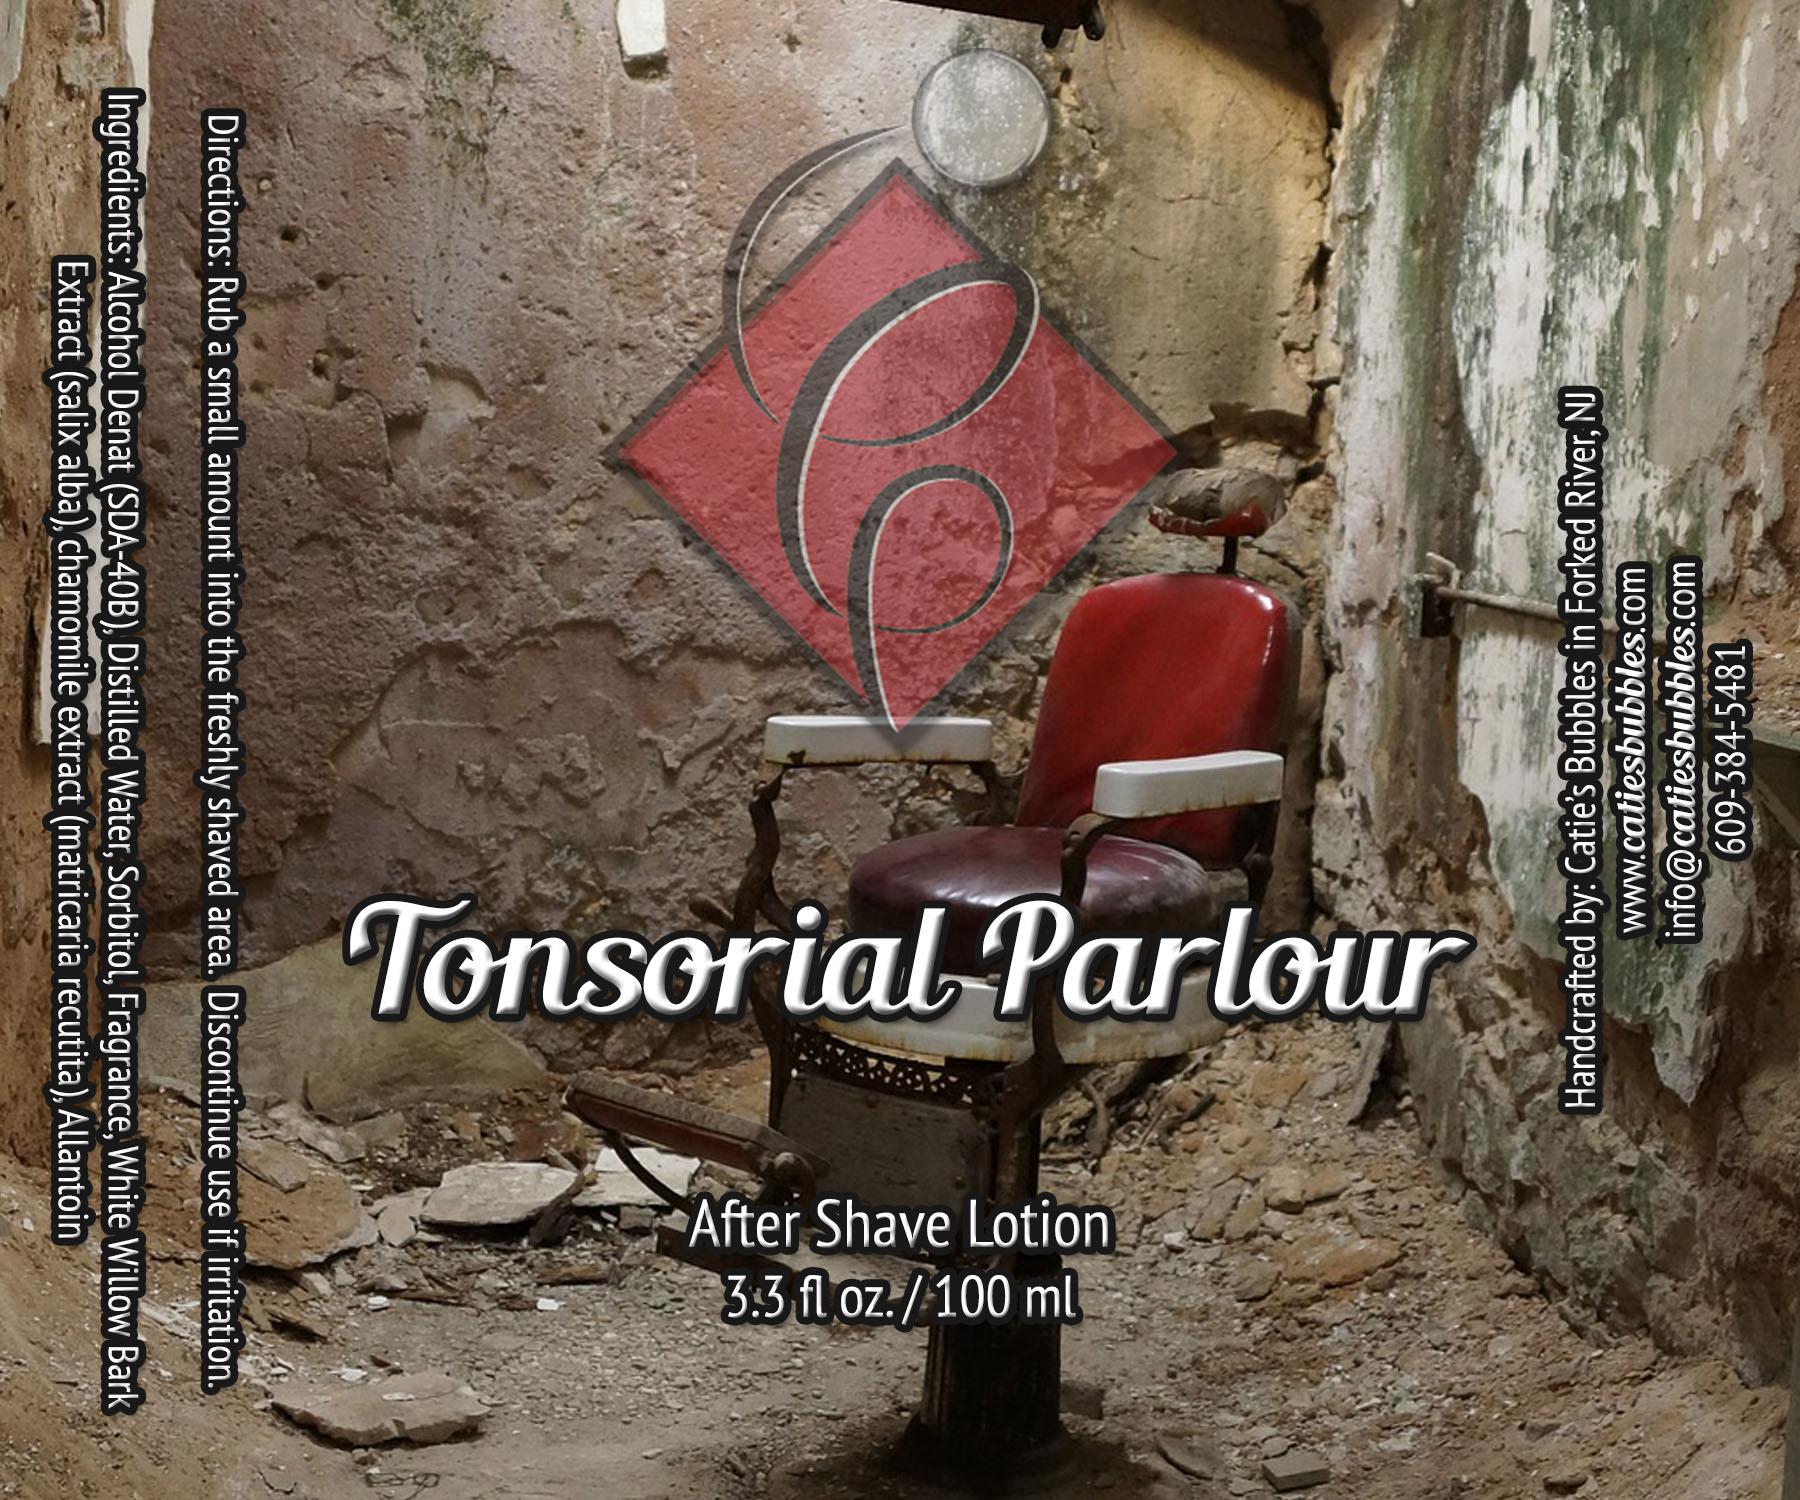 Tonsorial Parlour After Shave Lotion